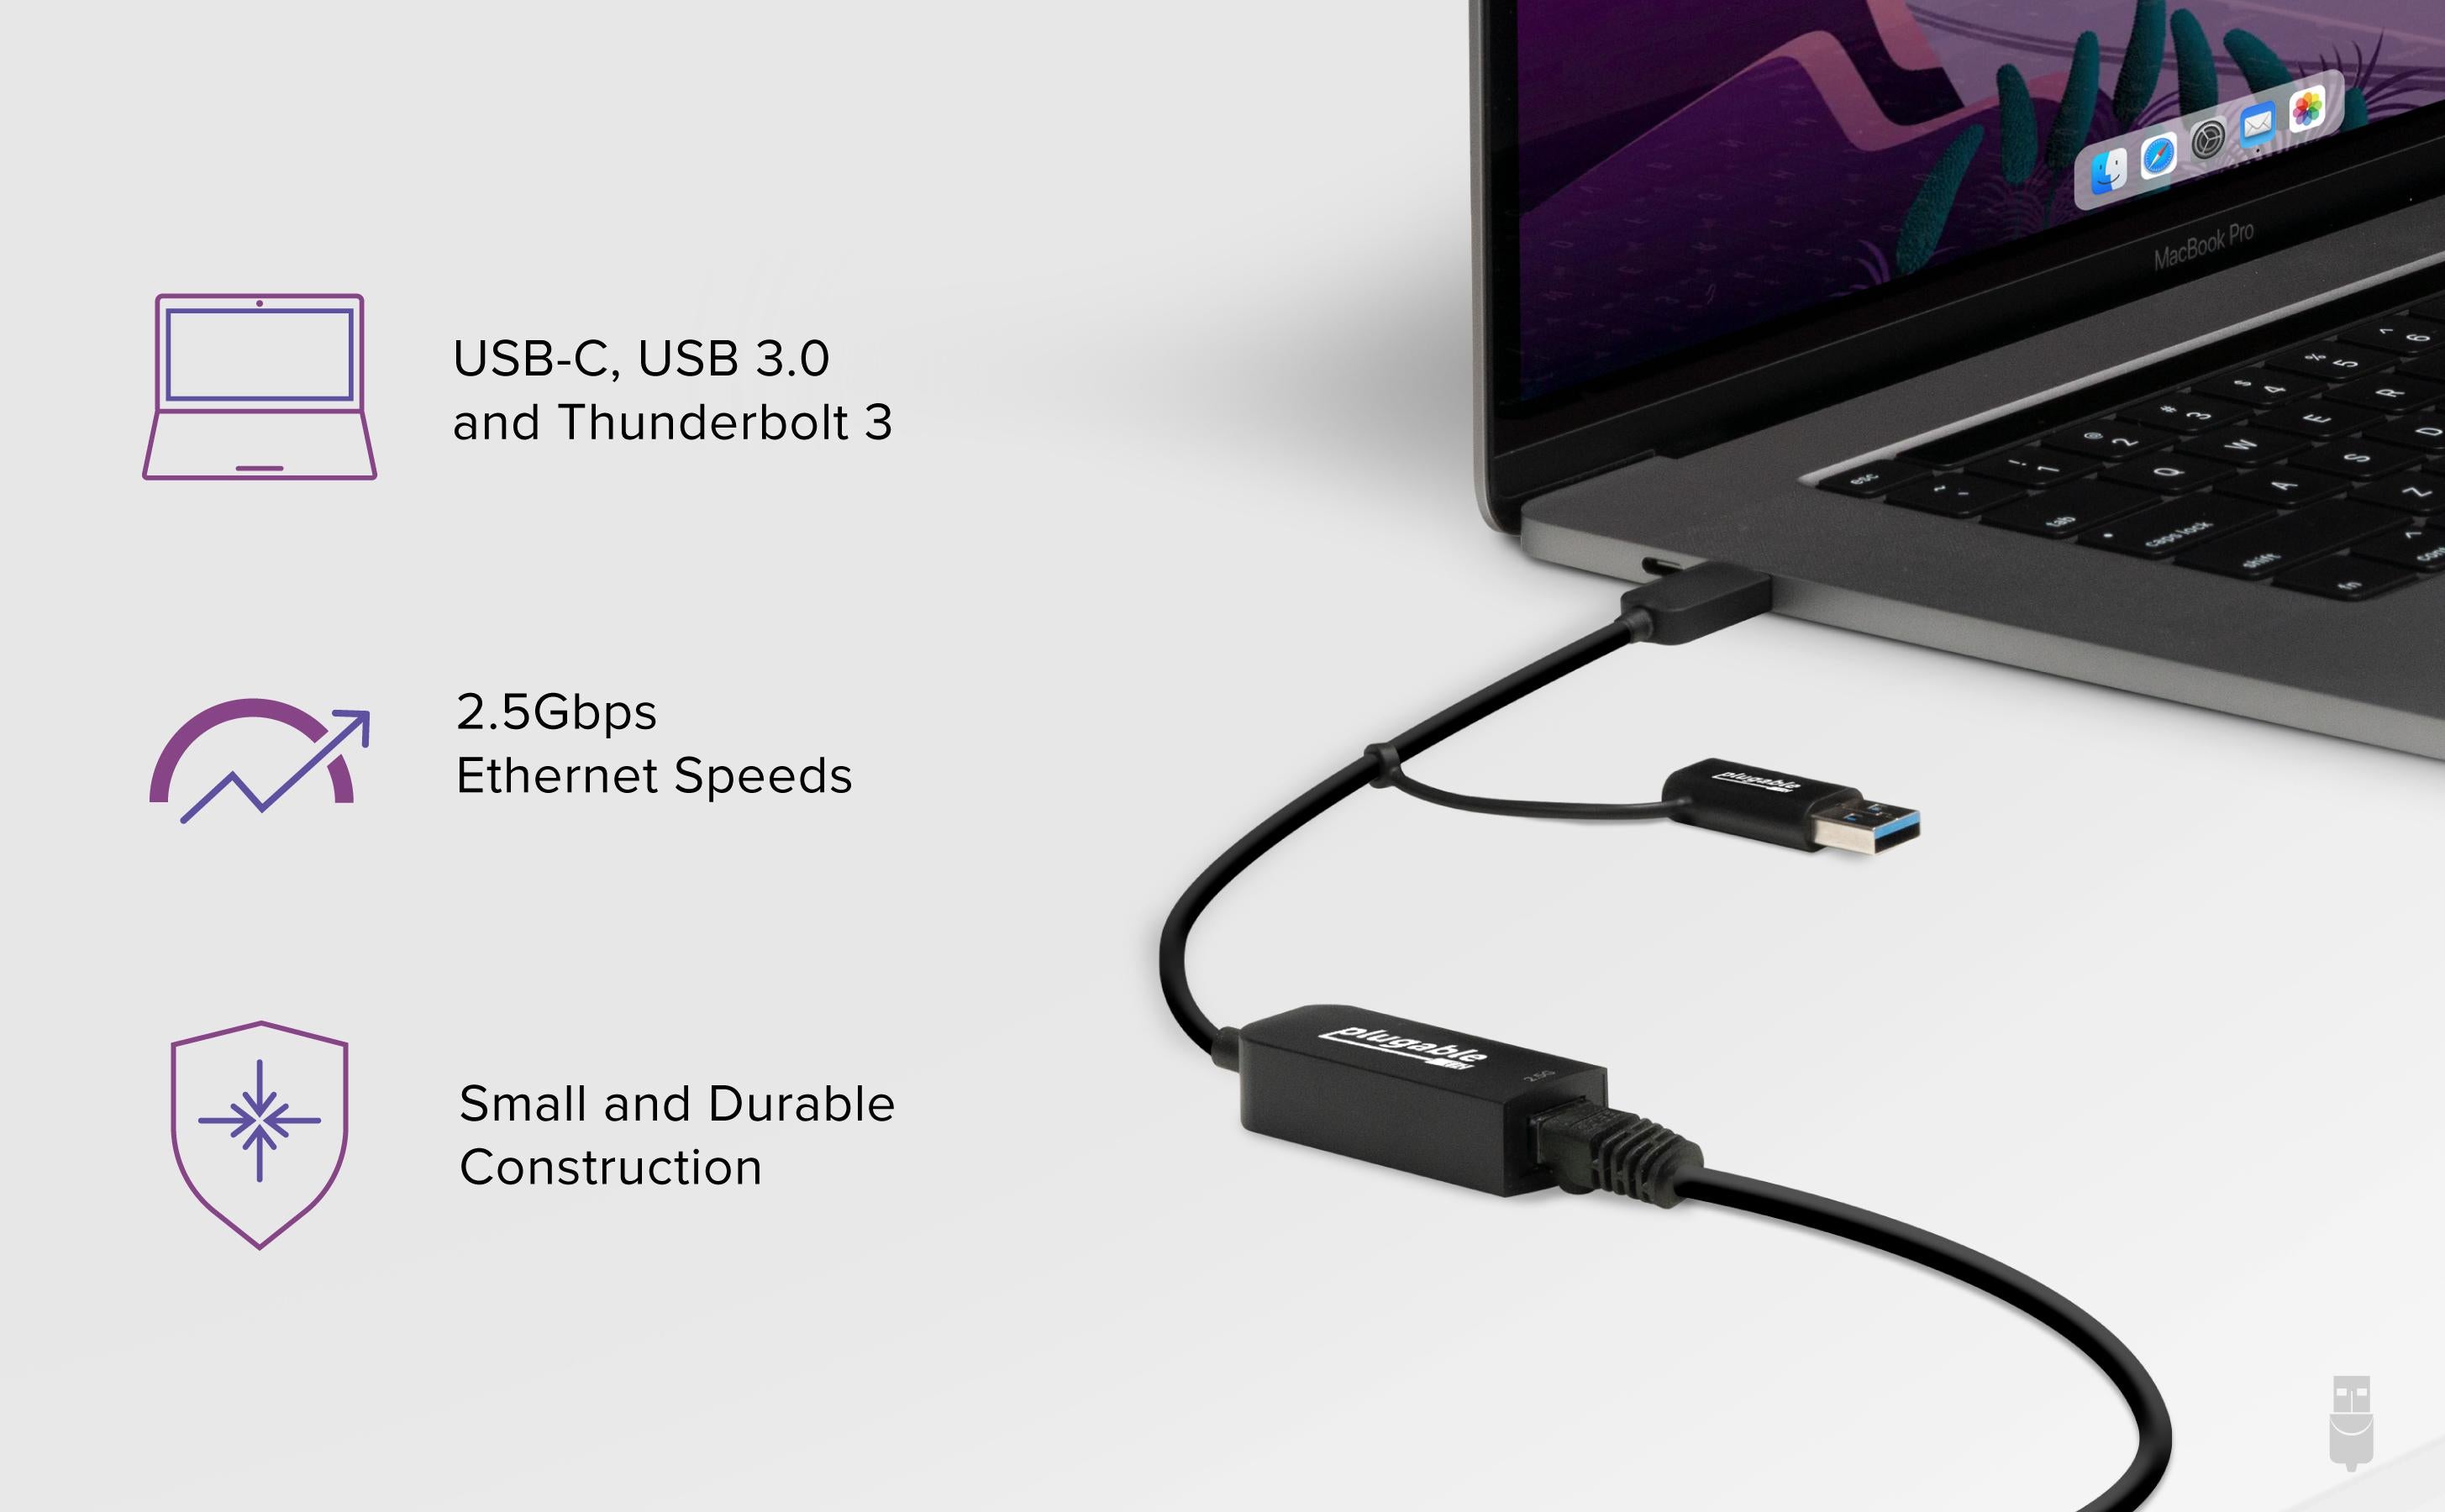 2.5Gbps Ethernet speeds available over USB-C, USB 3.0 (USB-A), and Thunderbolt 3 or 4. Small and durable construction.